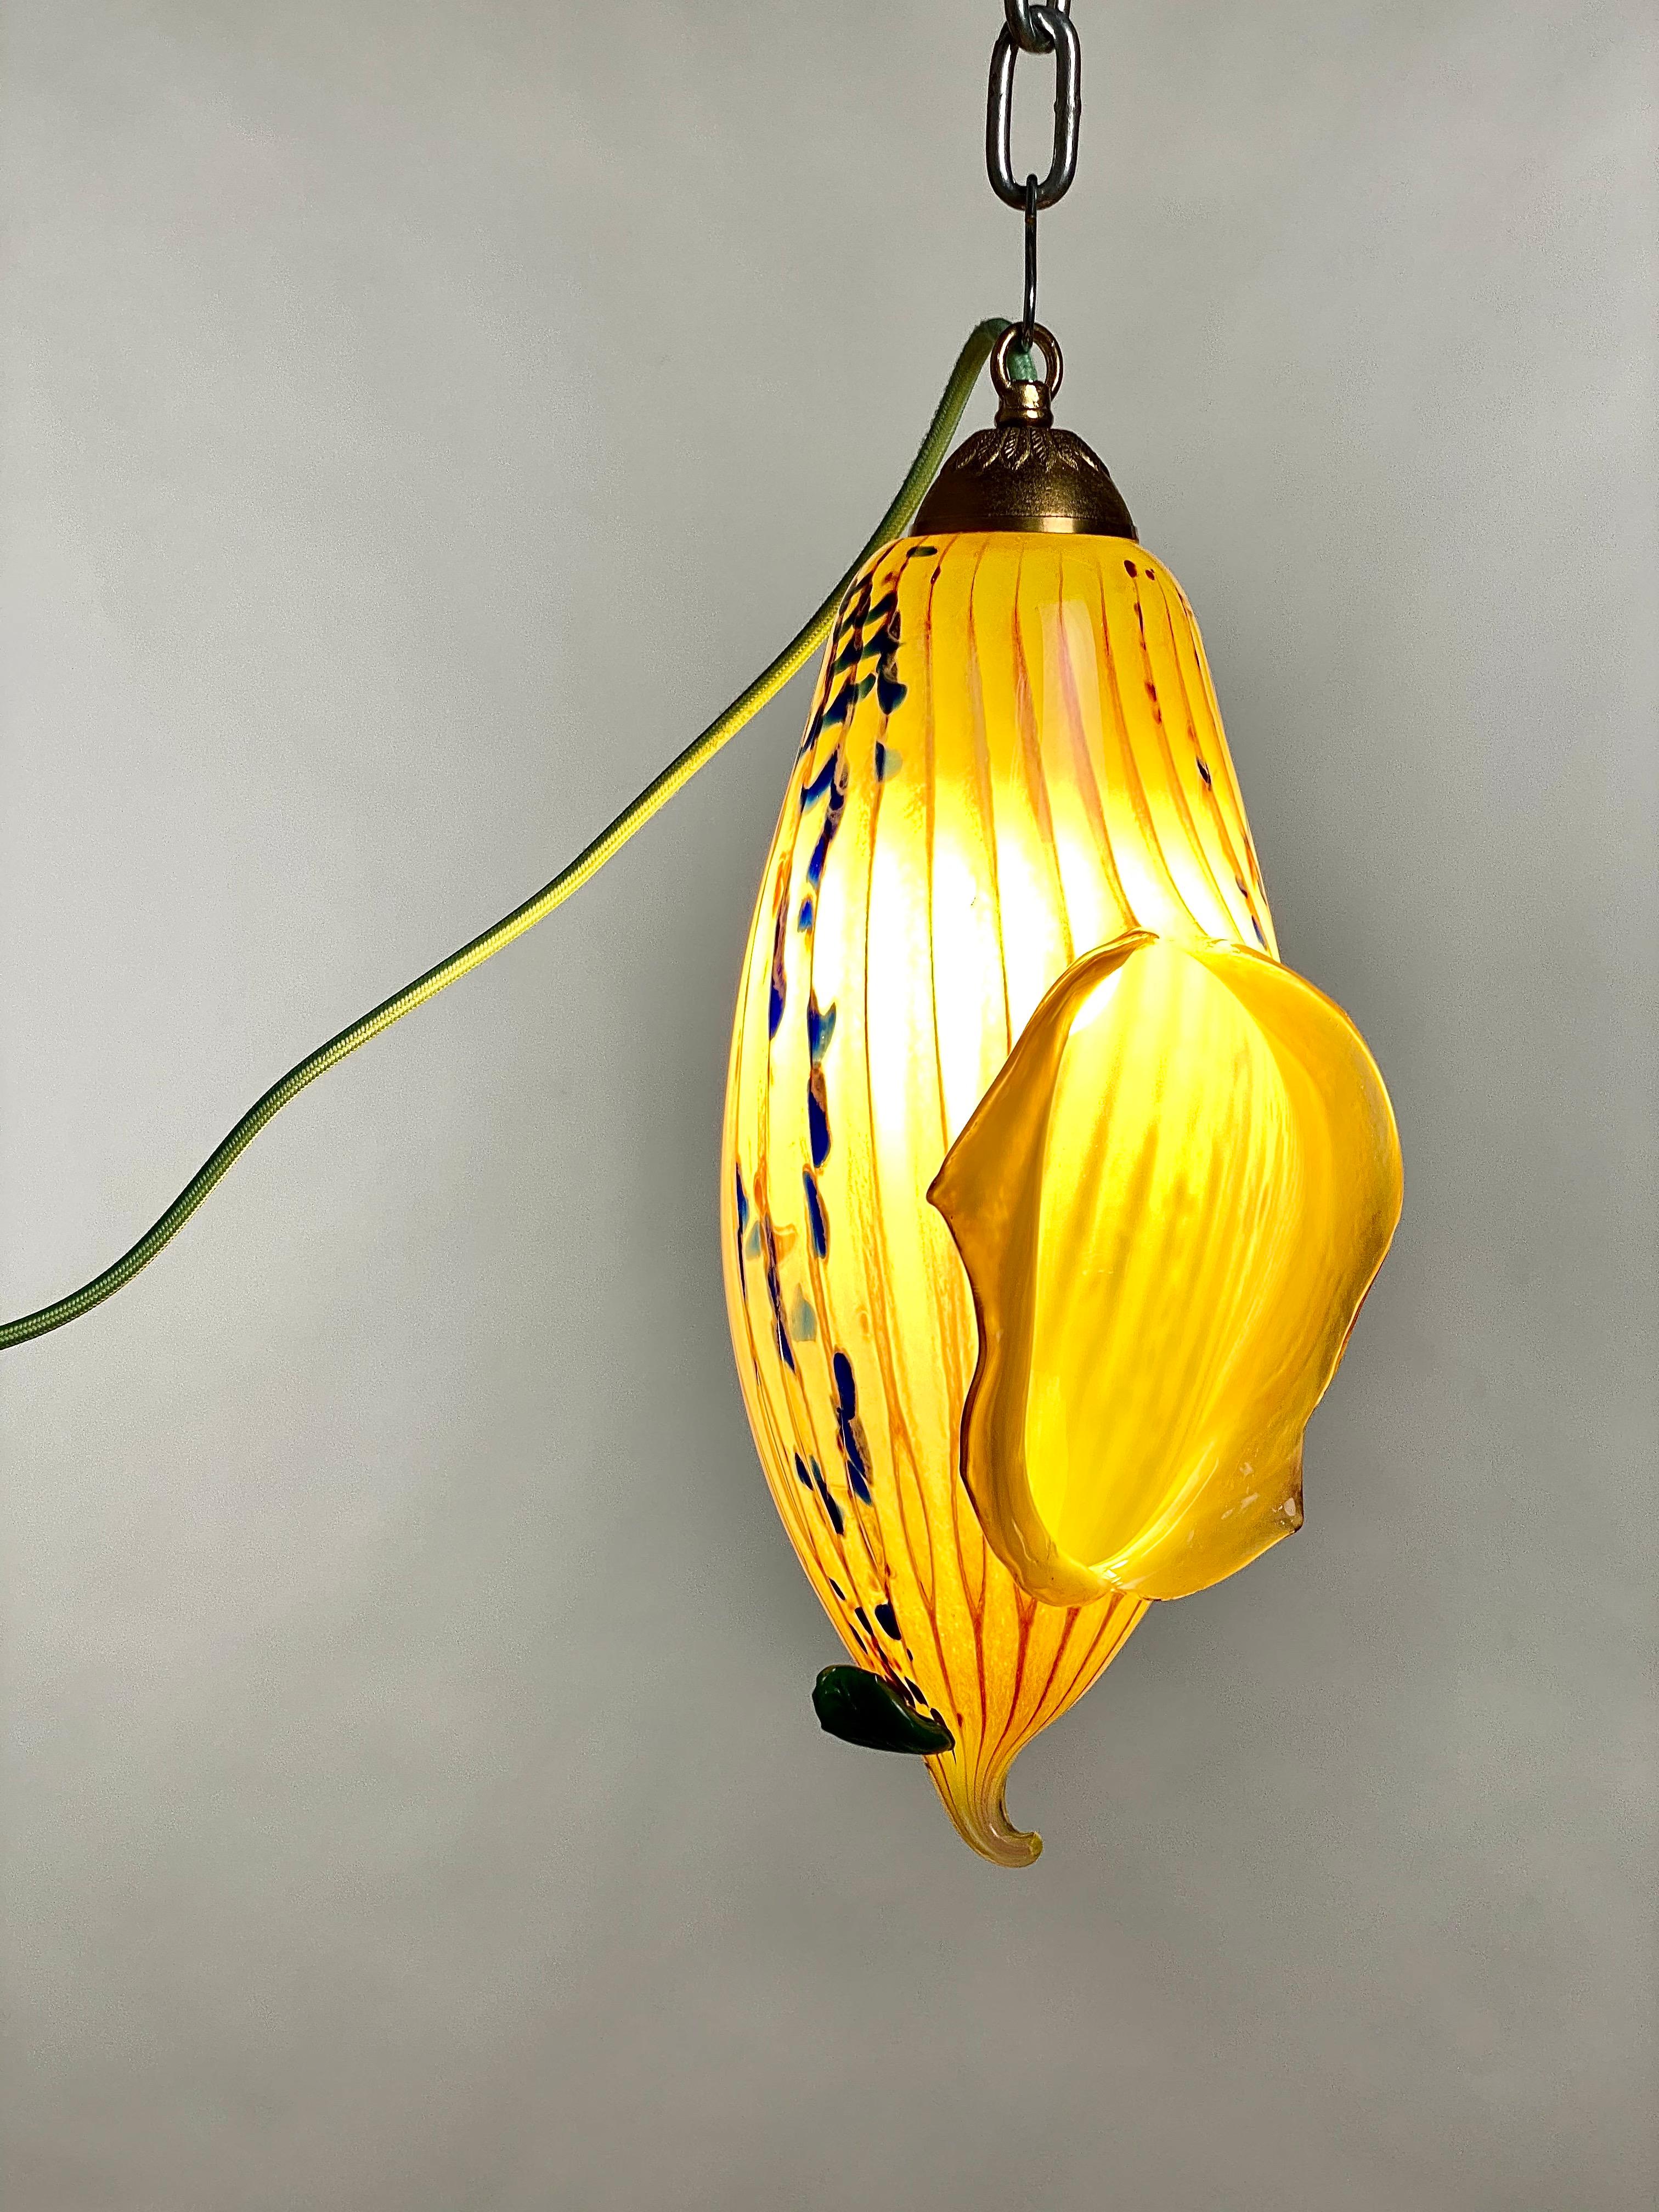 Contemporary Blown Glass Yellow and Lamp Pendent Light, 21st Century by Mattia Biagi For Sale